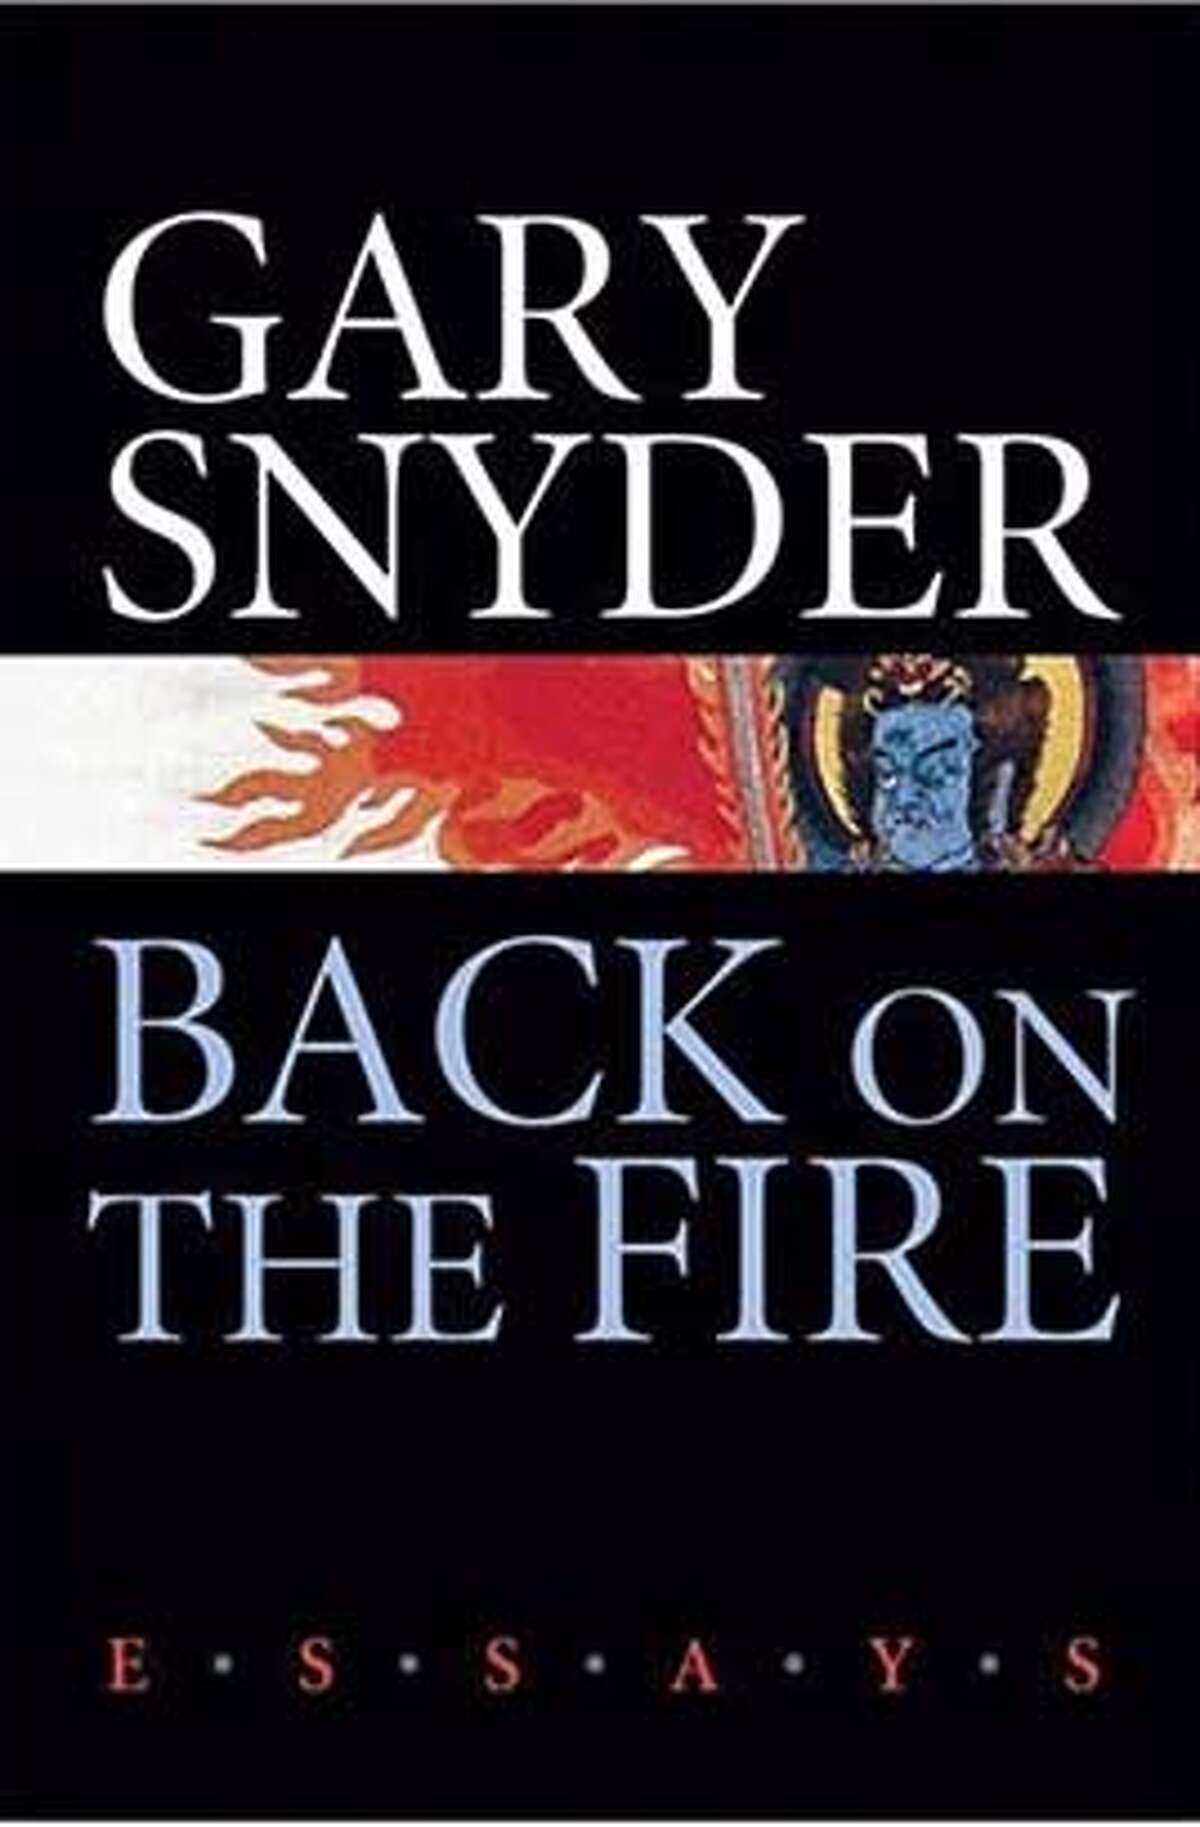 Back on fire by Gary Snyder